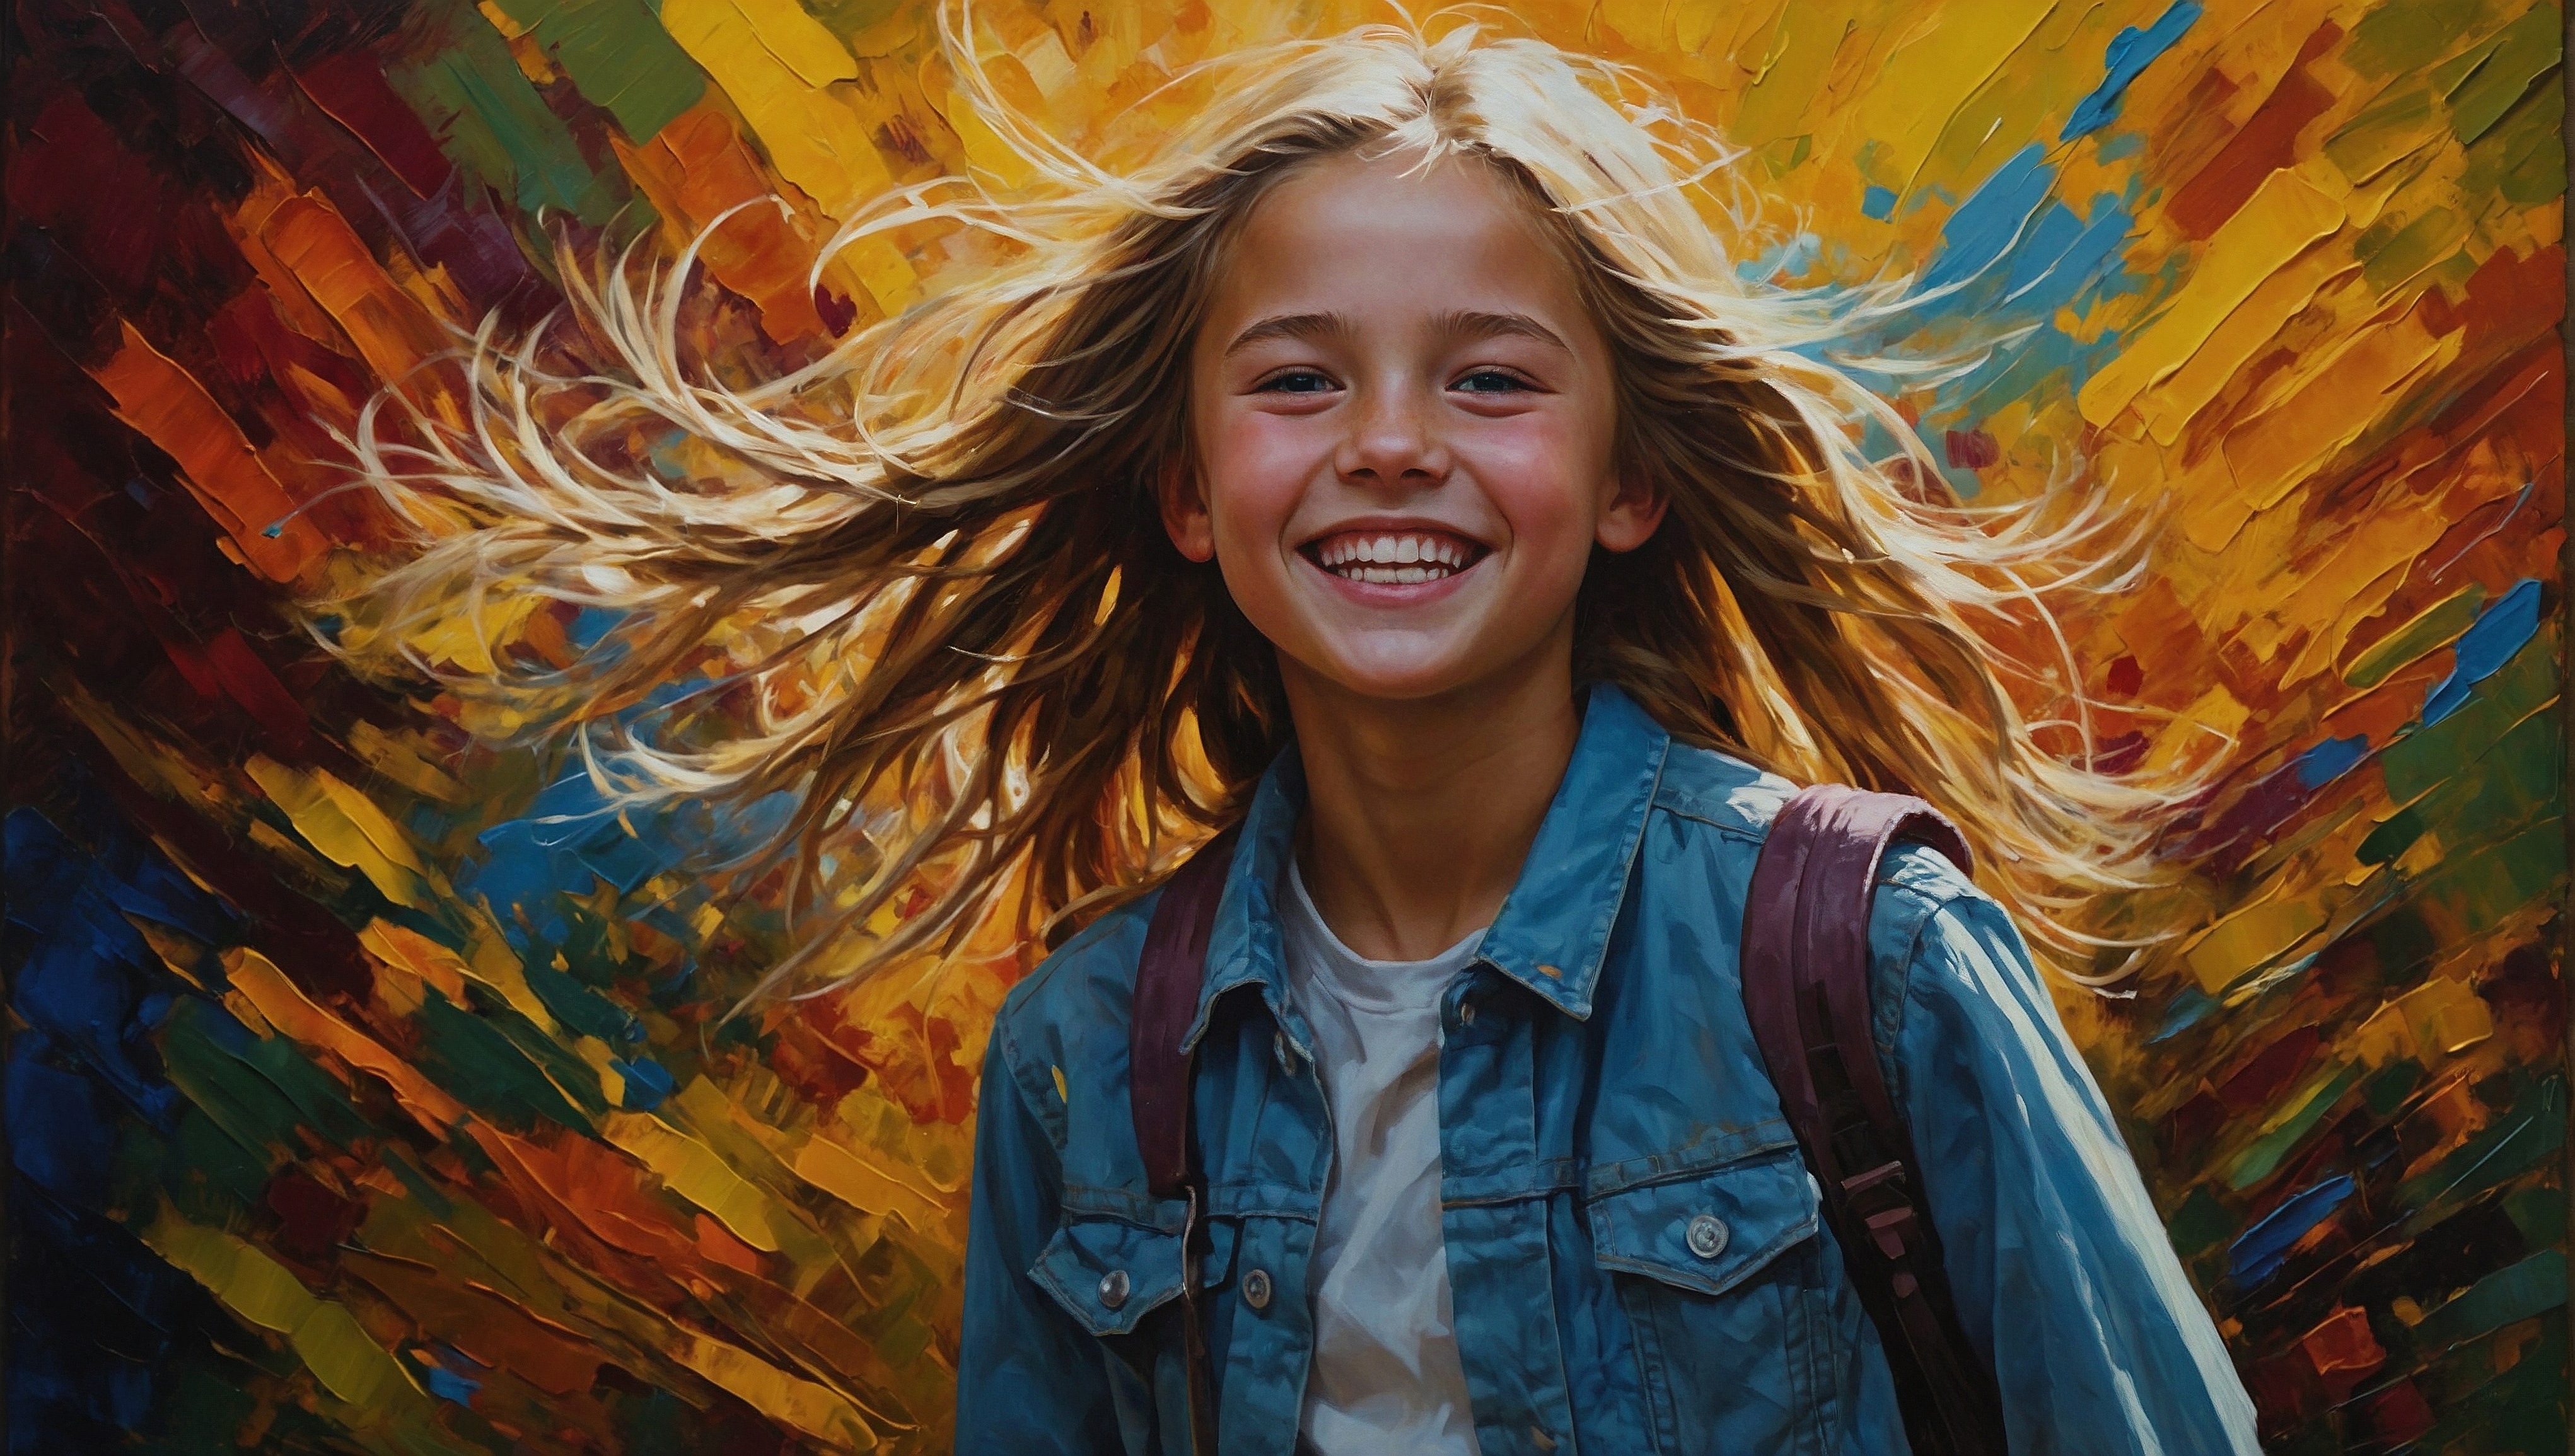 Free photo A girl smiles in the background of a painting with colorful wings